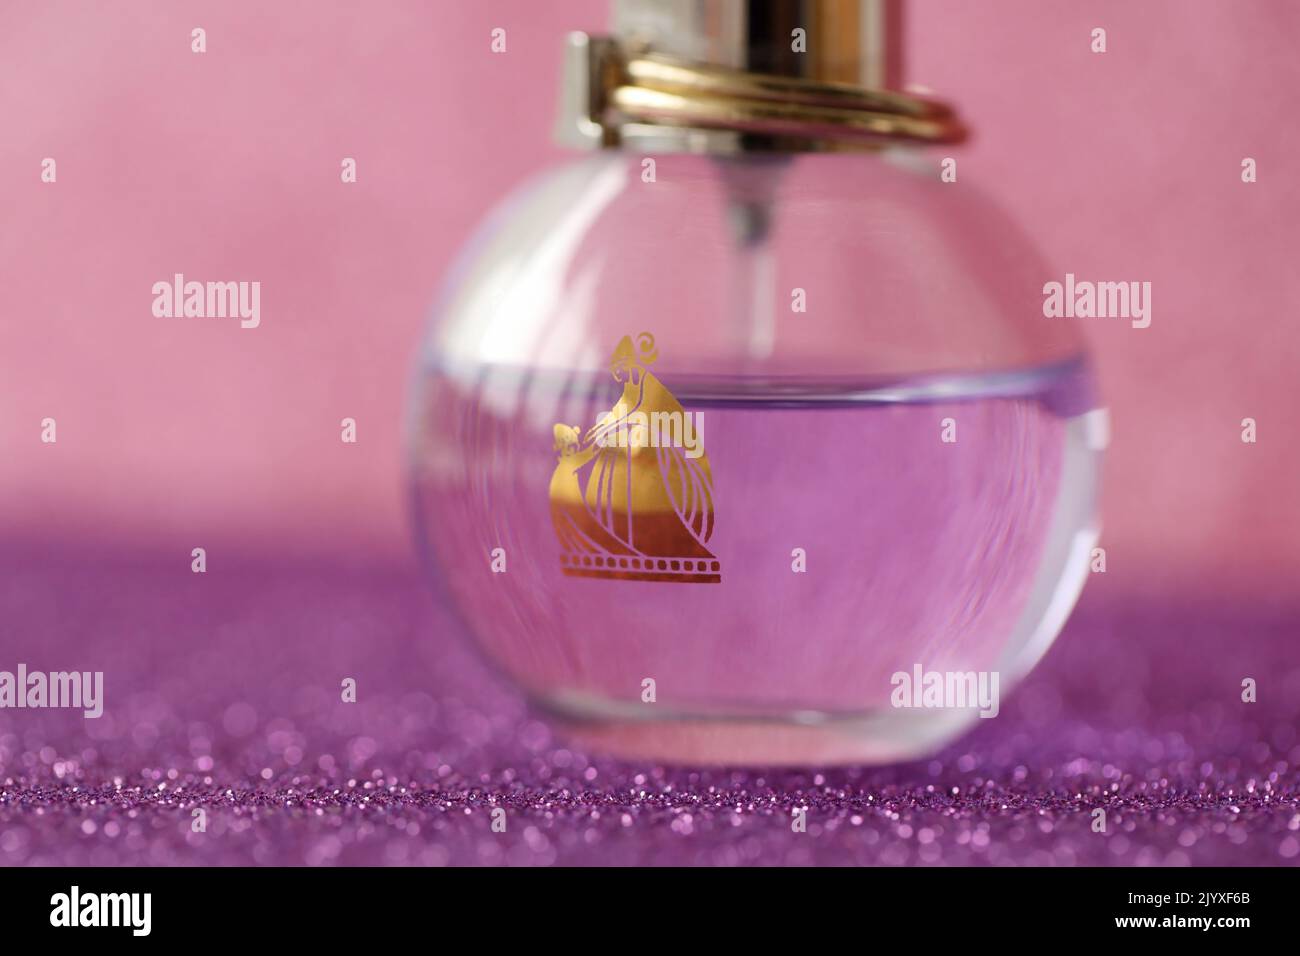 TERNOPIL, UKRAINE - SEPTEMBER 2, 2022 Lanvin Eclat Darpege perfume bottle on shiny glitter background in pink and purple colors Stock Photo